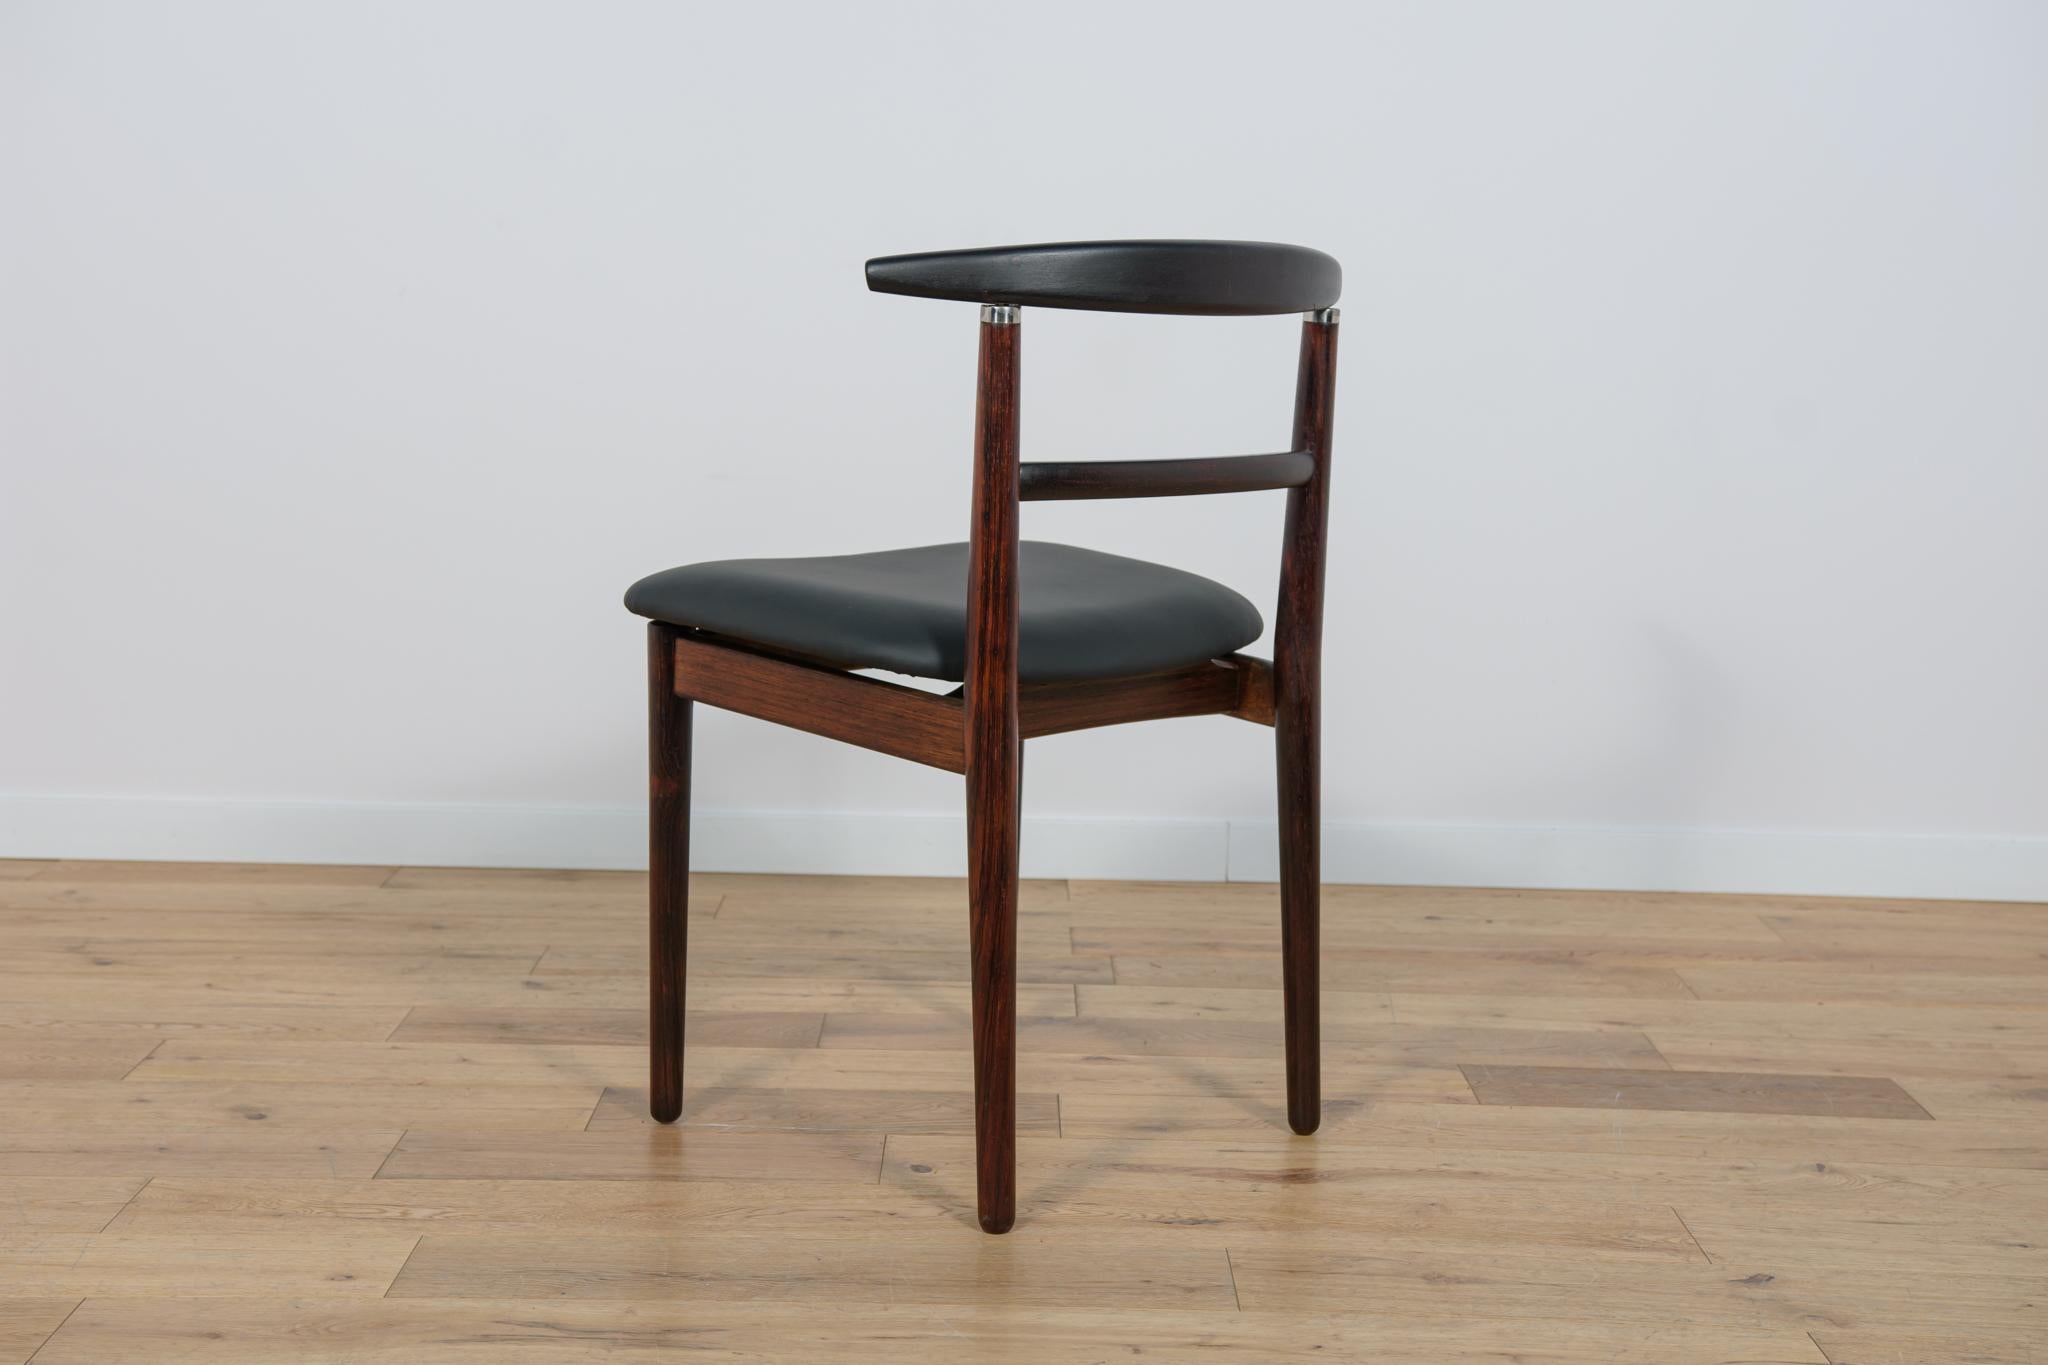 Rosewood Dining Chairs by Helge Sibast & Børge Rammerskov, Denmark, 1960s. For Sale 4